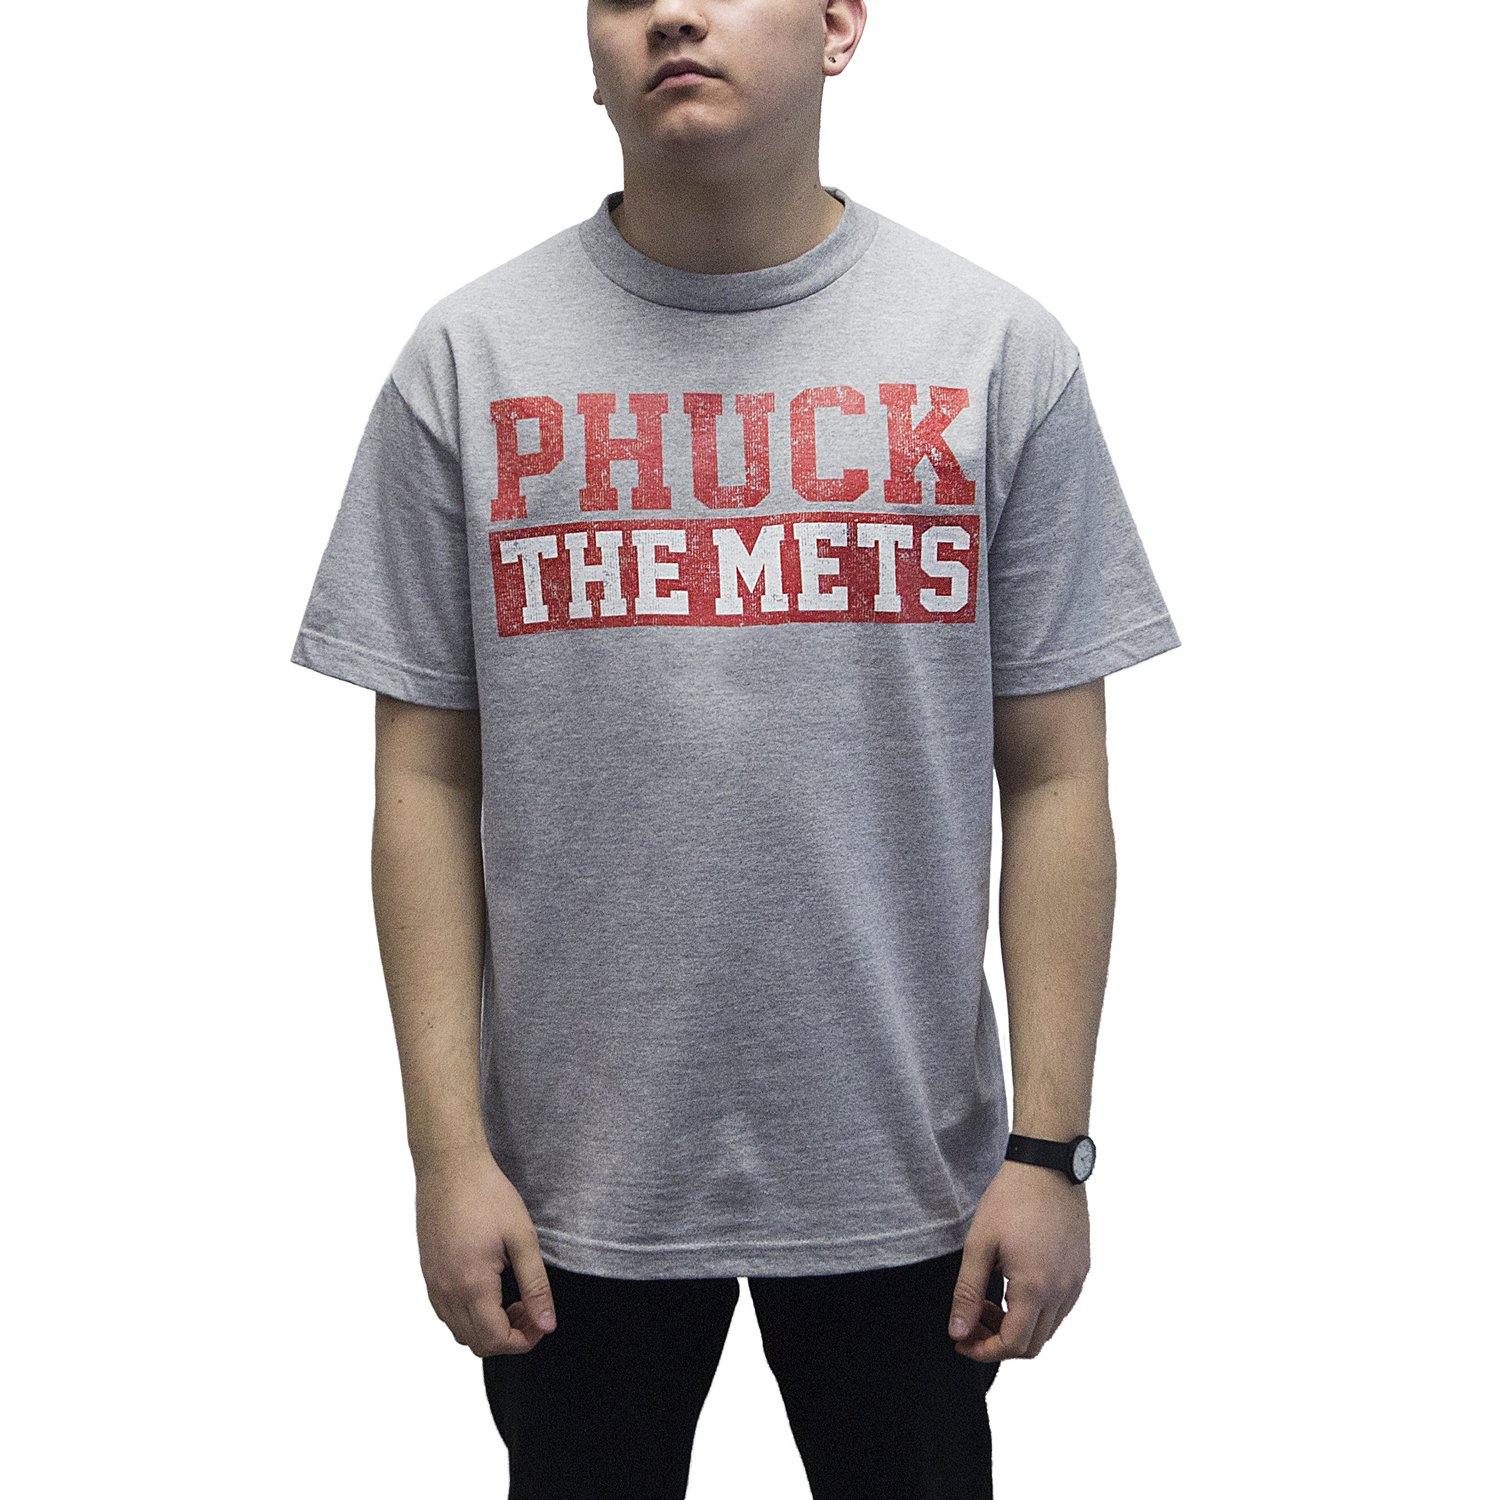 Cracked Bell Phuck The Mets Shirt 4X-Large